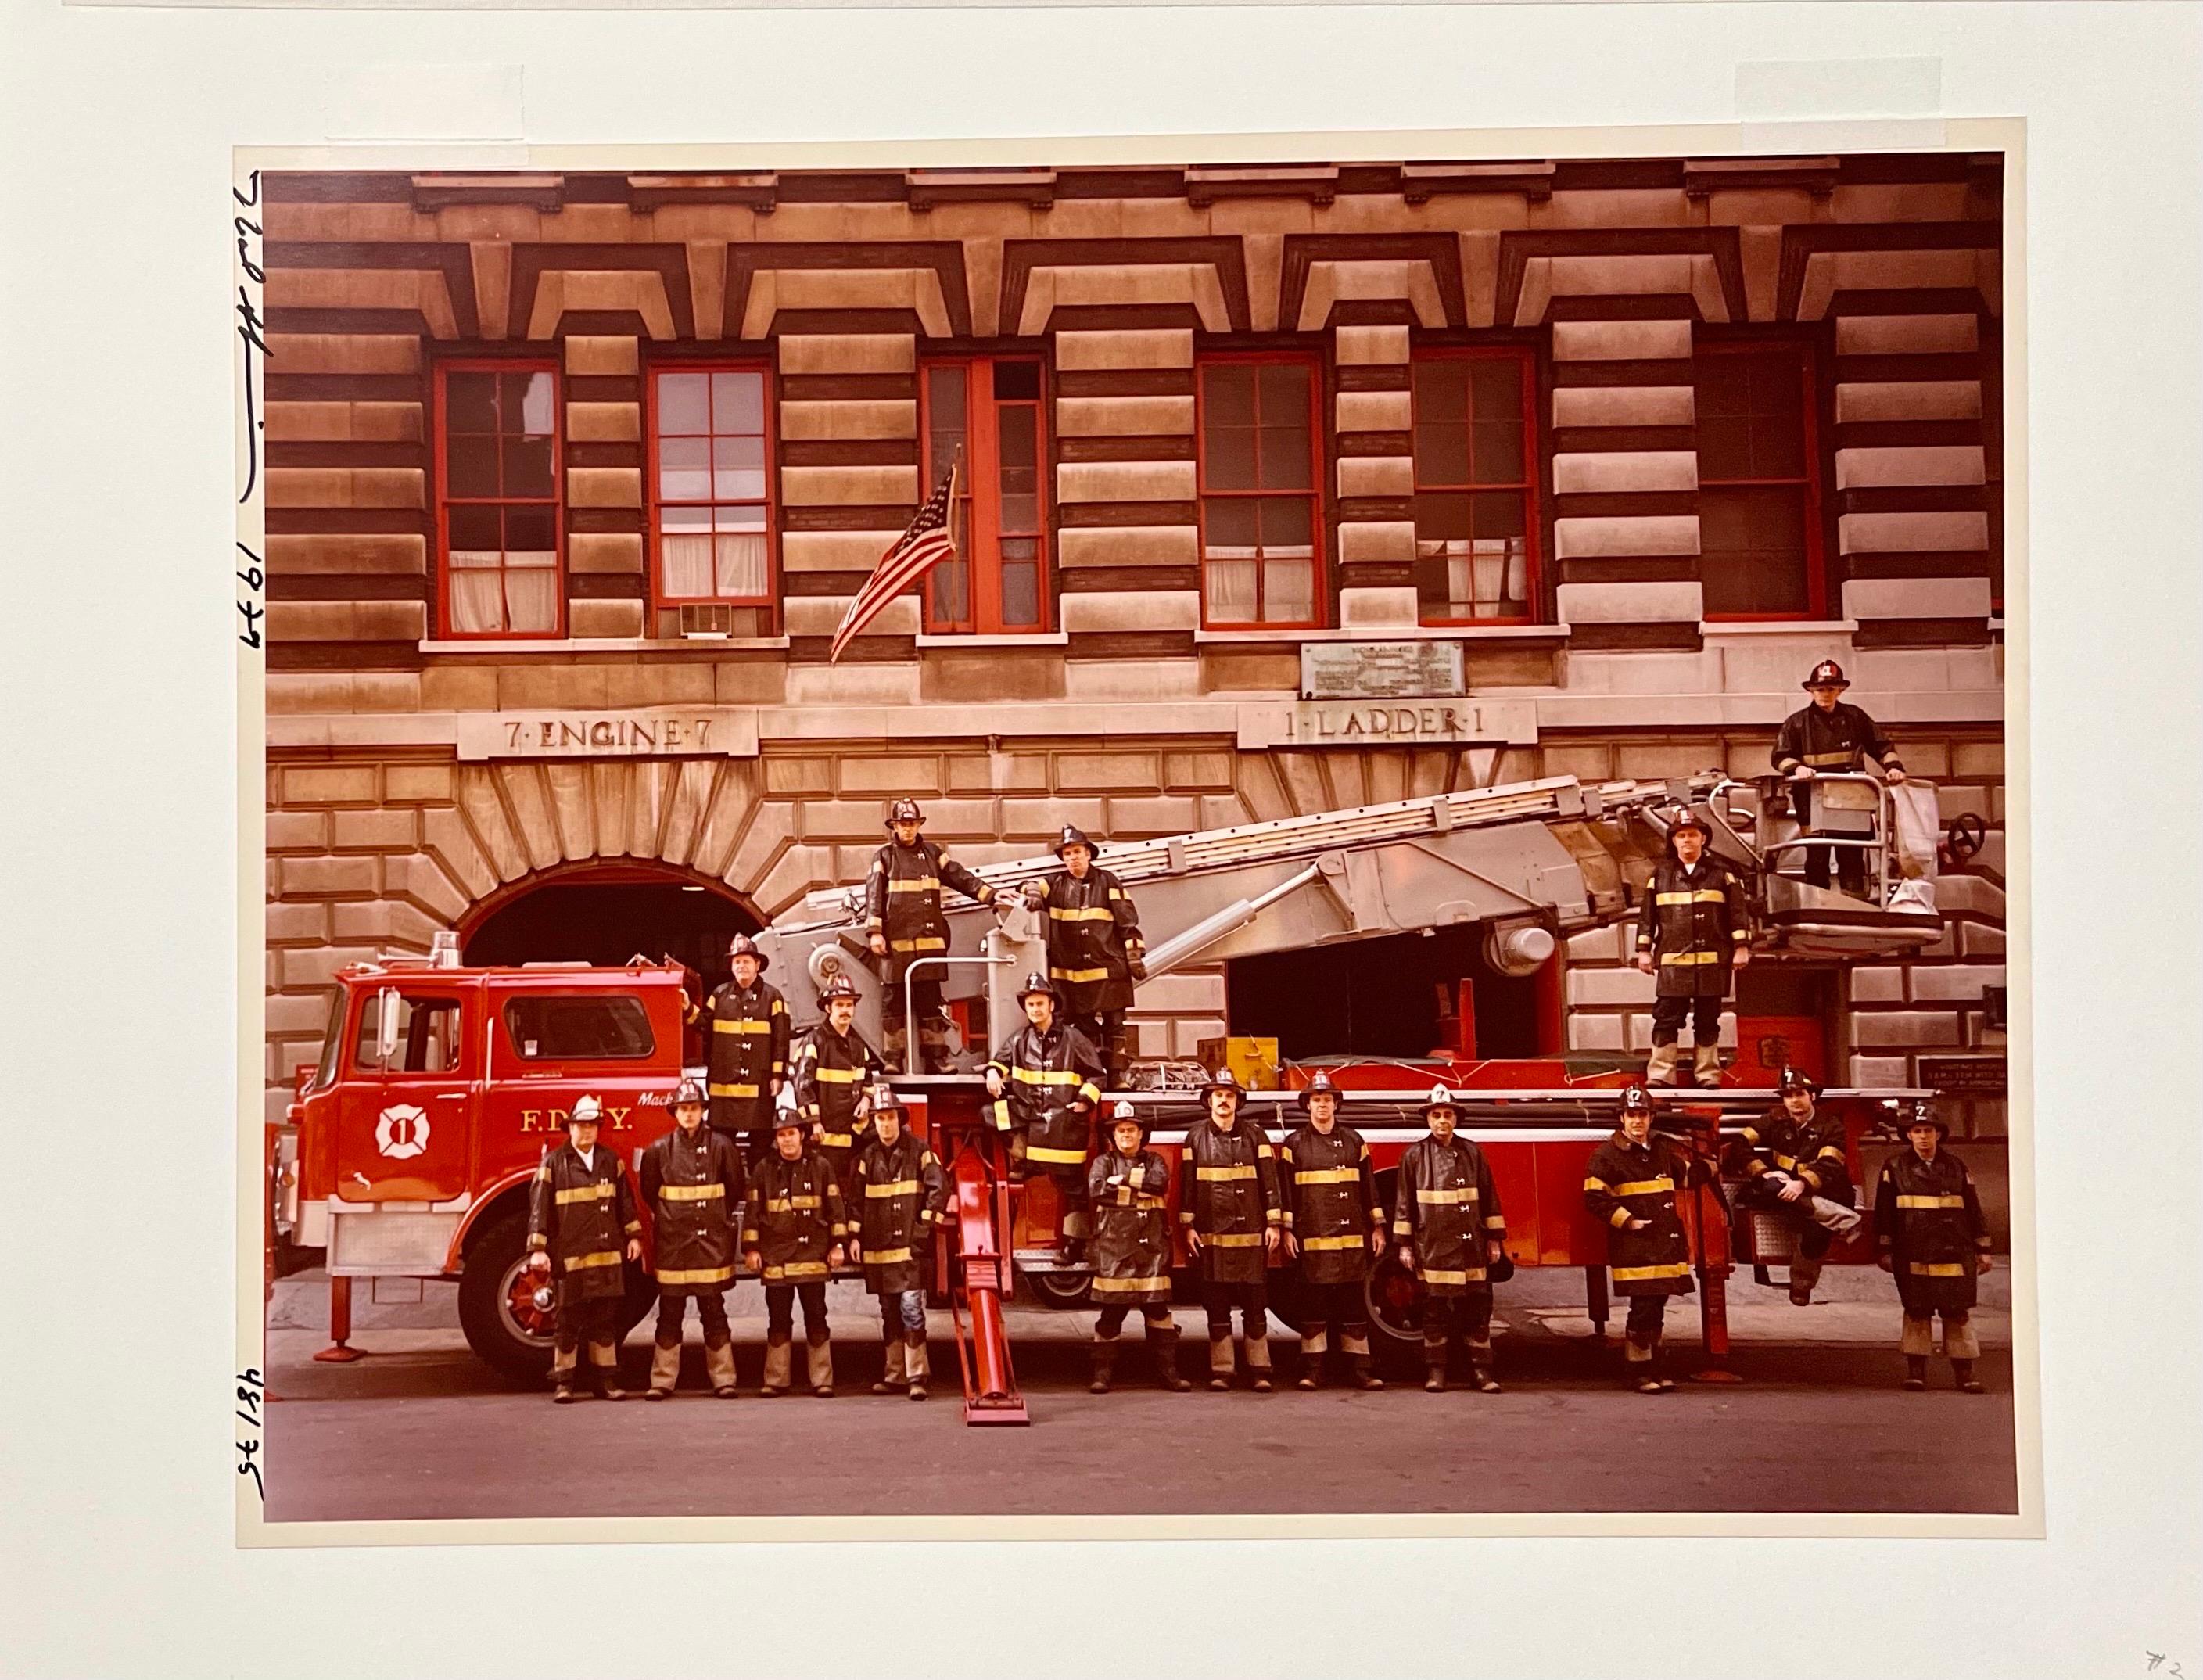 Neal Slavin (American, b. 1941)
Firemen, New York City Fire Department FDNY
Vintage C-print [Chromogenic development print; Ektacolor prints]
Hand signed and numbered by the photographer 48/75
Photos made with 2.25 X 2.25 Hasselblad camera and 4 X 5